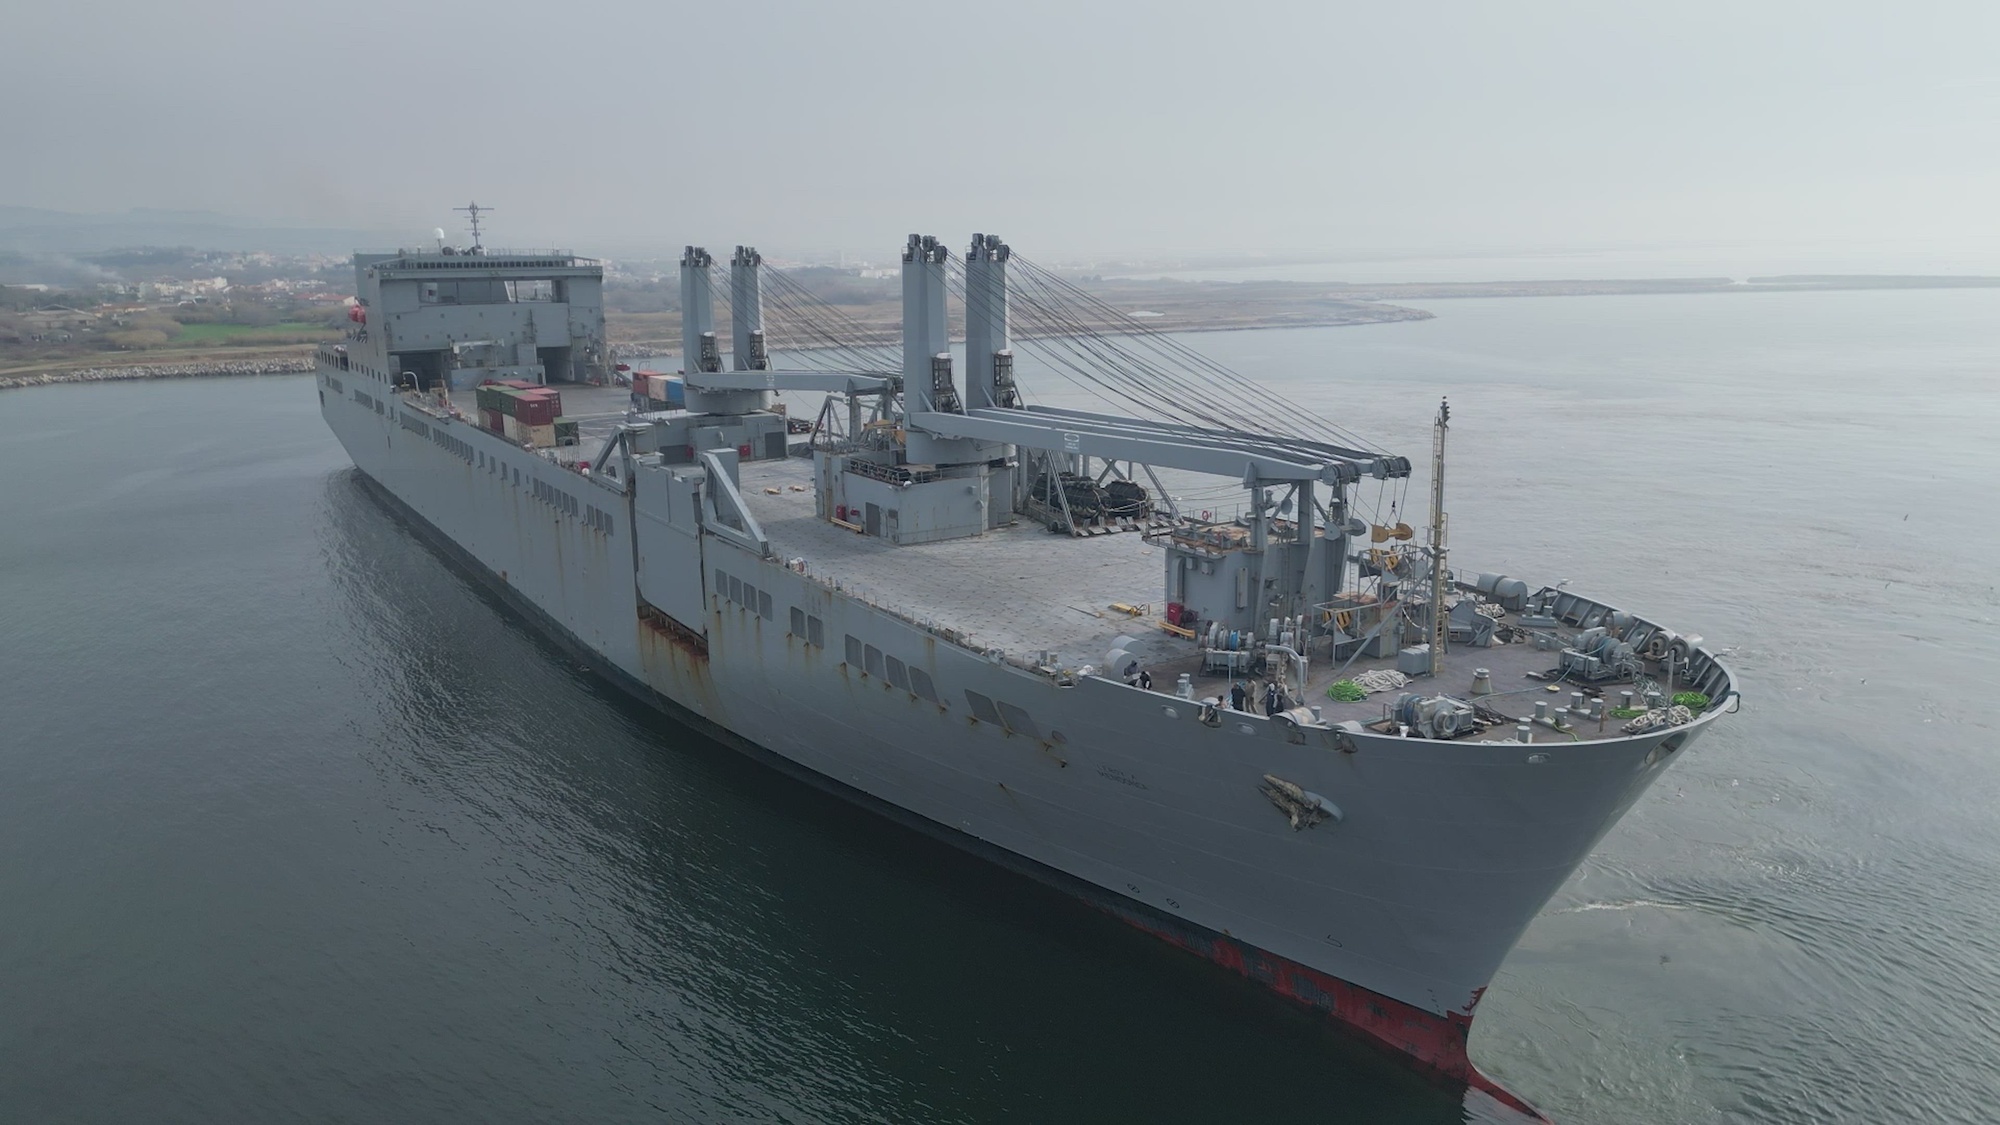 The cargo vessel Leroy A. Mendonica arrives carrying United States Army equipment at the port of Alexandroupolis, Greece, March 2024, in support of the 3rd Armored Brigade Combat Team, 4th Infantry Division’s deployment. The offload occurred during the 3/4 ID ABCT’s nine-month deployment as a rotational troop. The 3/4 ID ABCT was met by several units to include the 839th Transportation Battalion of the 598th Transportation Brigade, 21st Theater Sustainment Command, and host-nation partners who coordinated port operations to ensure 3/4 ID ABCT’s successful arrival and preparation for onward movement into the European theater. 3/4 ID ABCT will play a critical role in its rotational deployment as it trains closely with European partners and allies to defend against threats to the shared security of the region. The deployment of ready, combat-credible U.S. forces to Europe is evidence of the strong U.S. commitment to NATO and Europe. (U.S. Army Photo by Davide Dalla Massara)